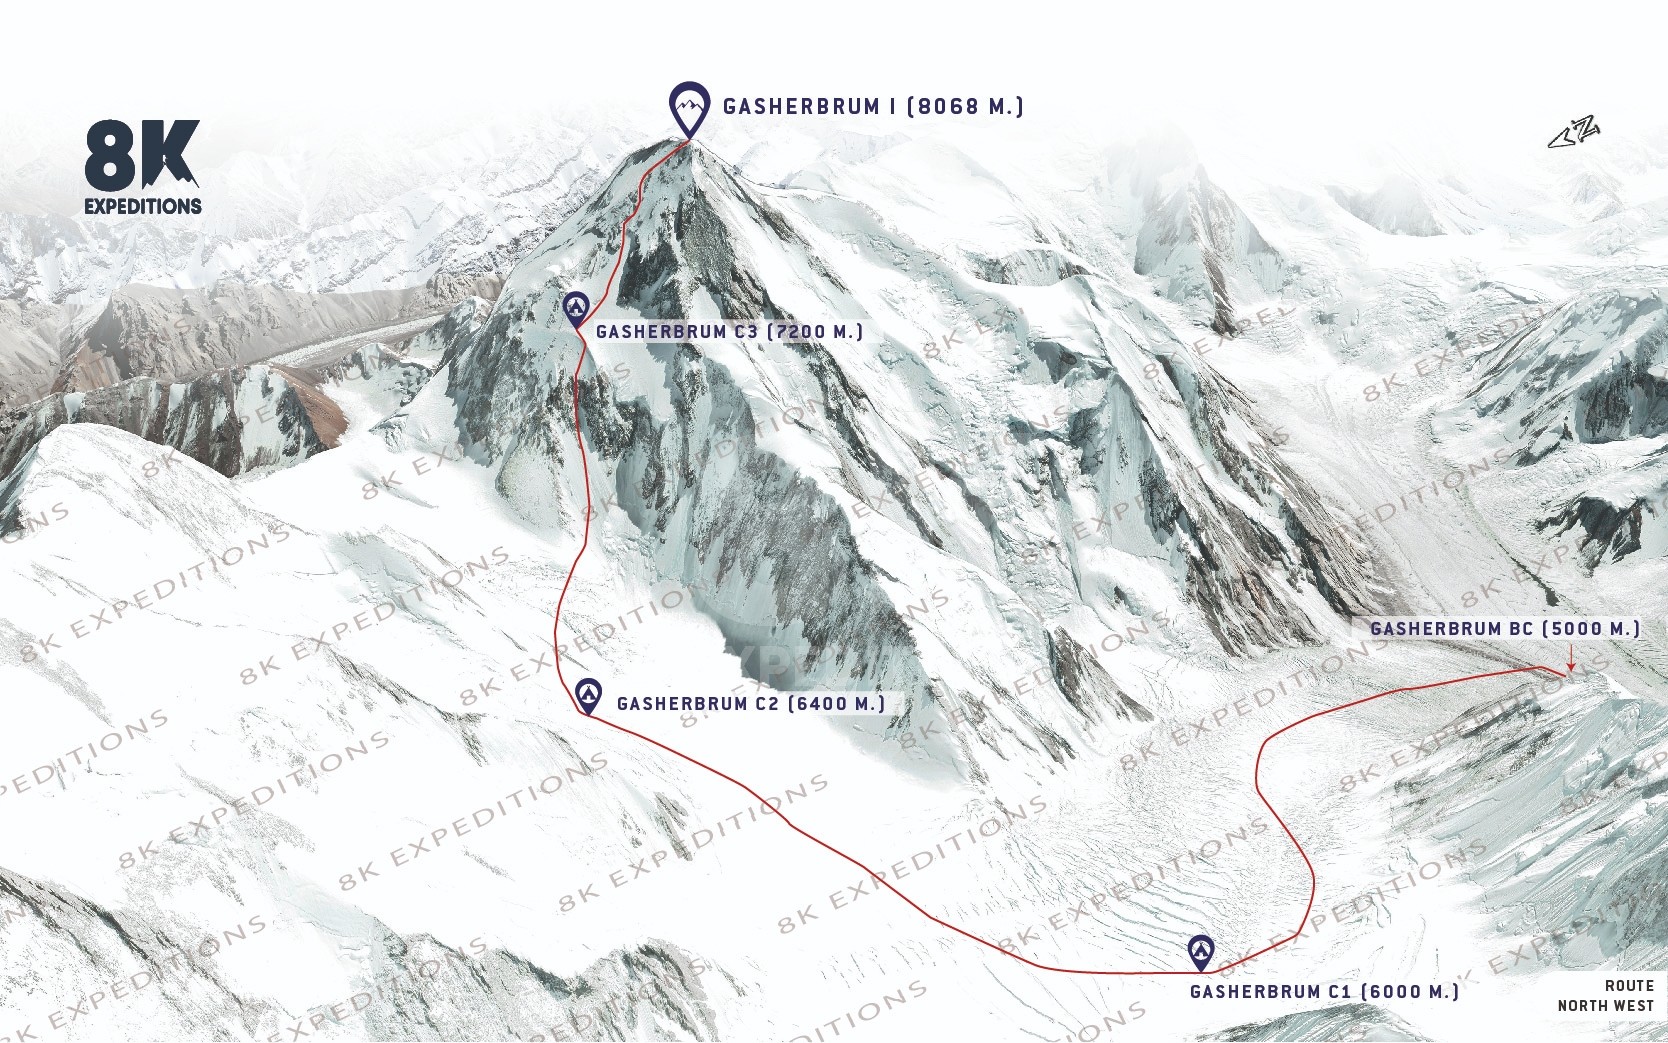 Gasherbrum 1 Expedition (8,080 M) | 11th Highest Mountain In The World |